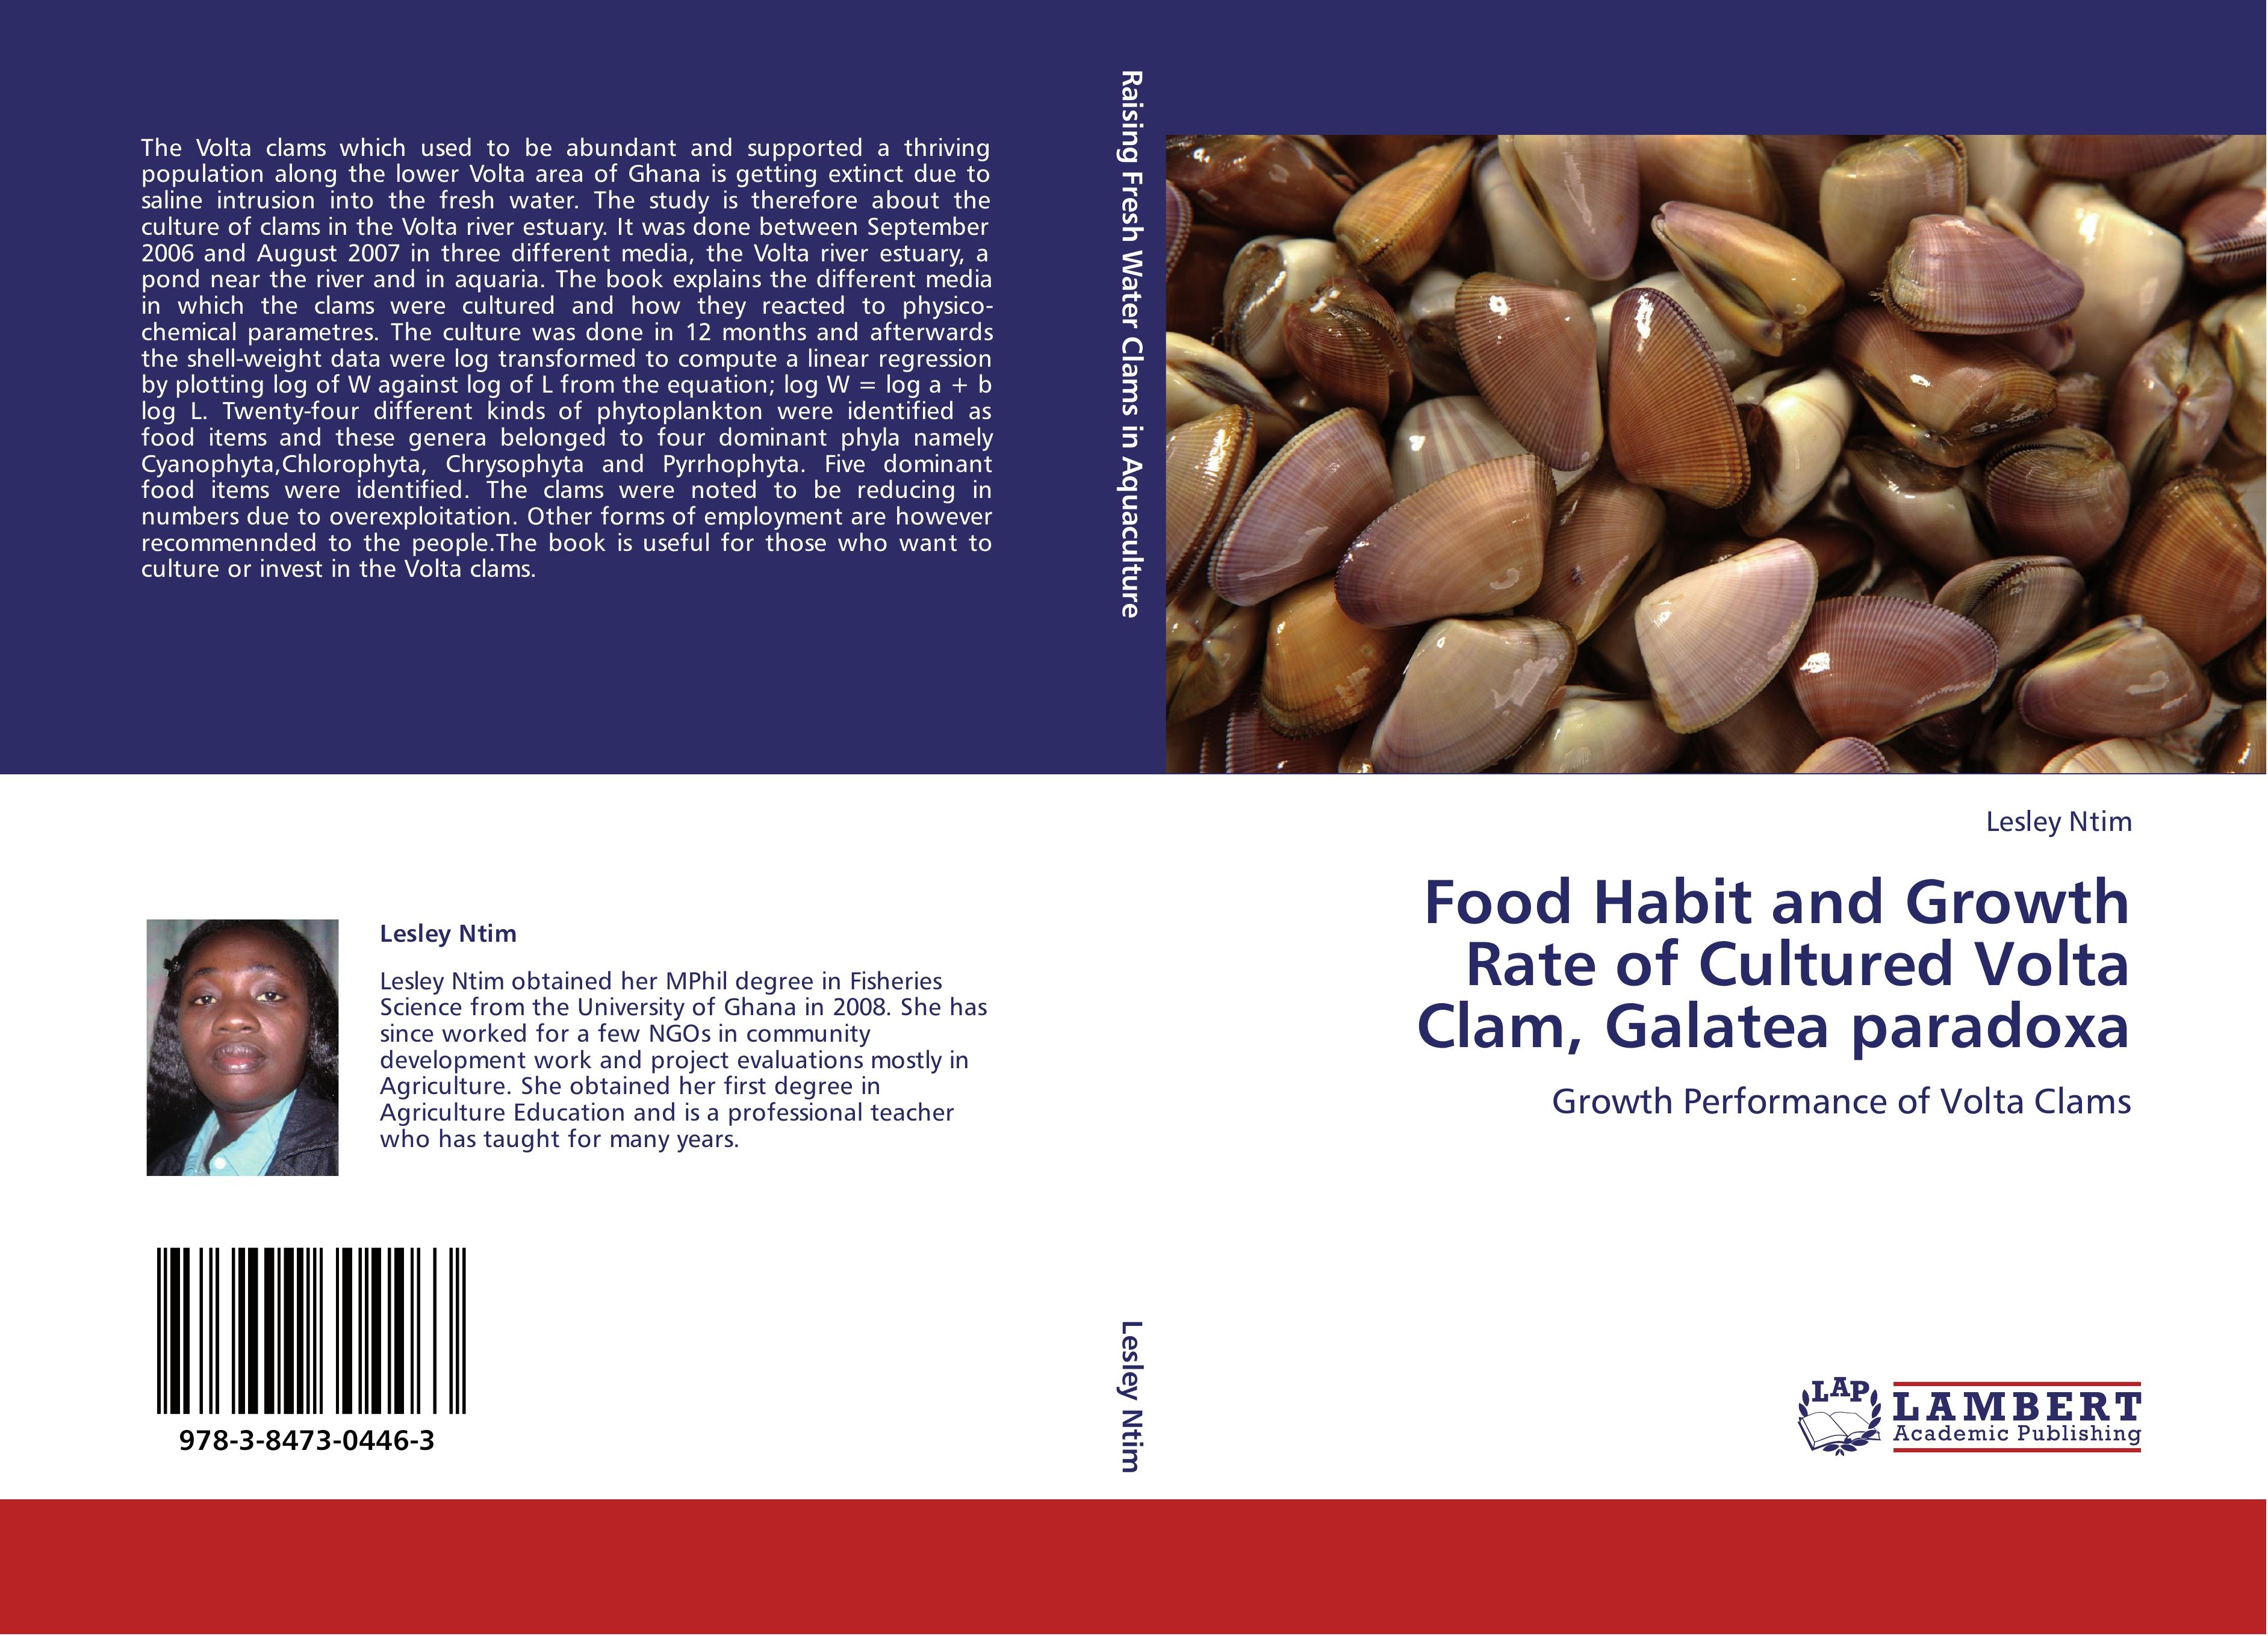 Food Habit and Growth Rate of Cultured Volta Clam, Galatea paradoxa - Lesley Ntim